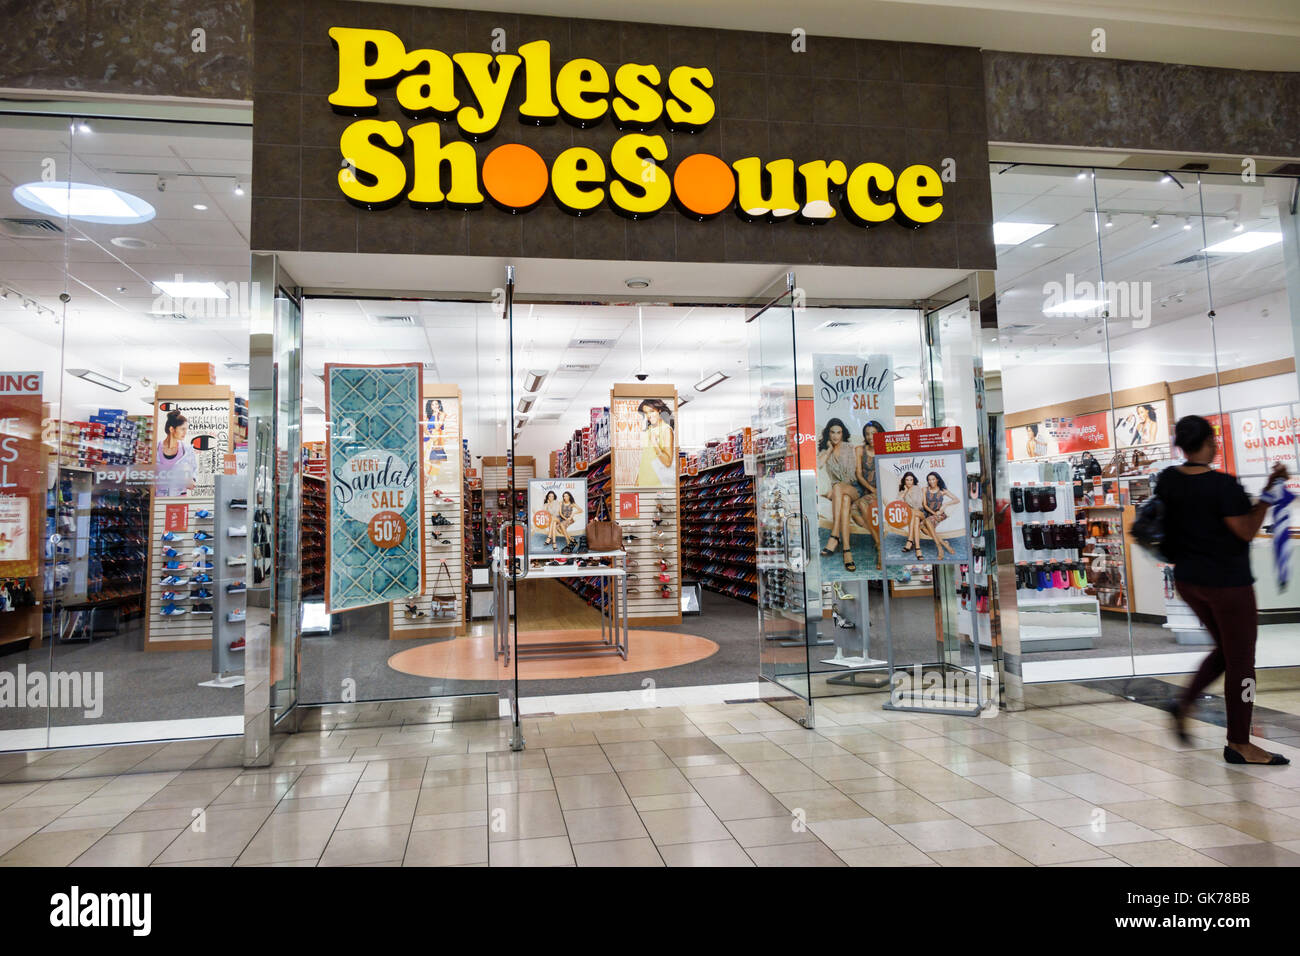 Sandal Shops High Resolution Stock Photography and Images - Alamy